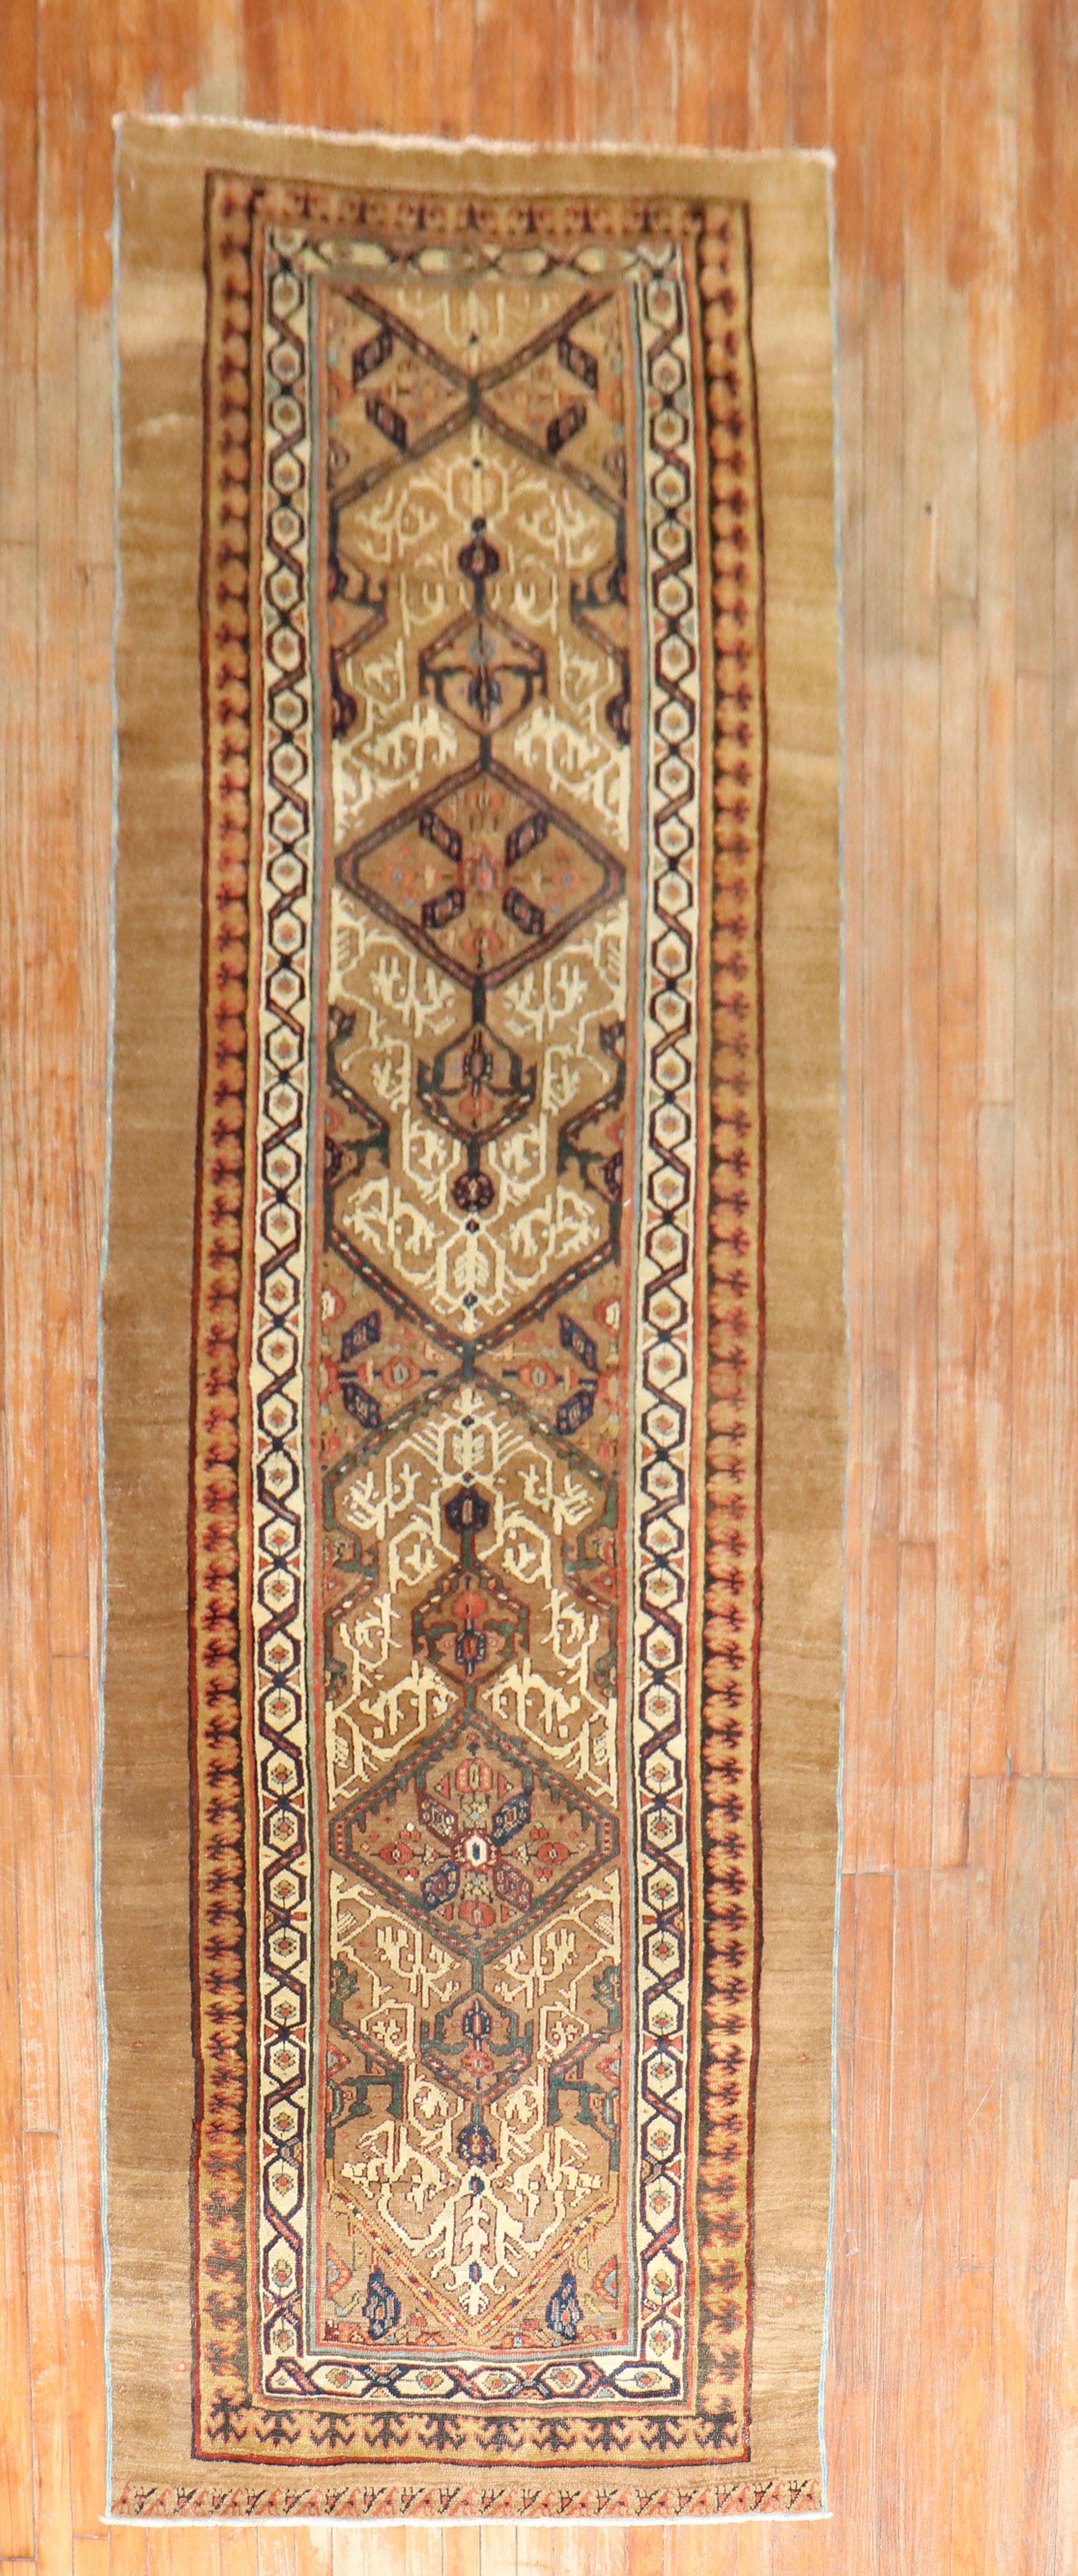 A late 19th century tribal highly decorative Persian Bakshaish Camel Hair runner. Great quality and great condition.

Measures: 3'8